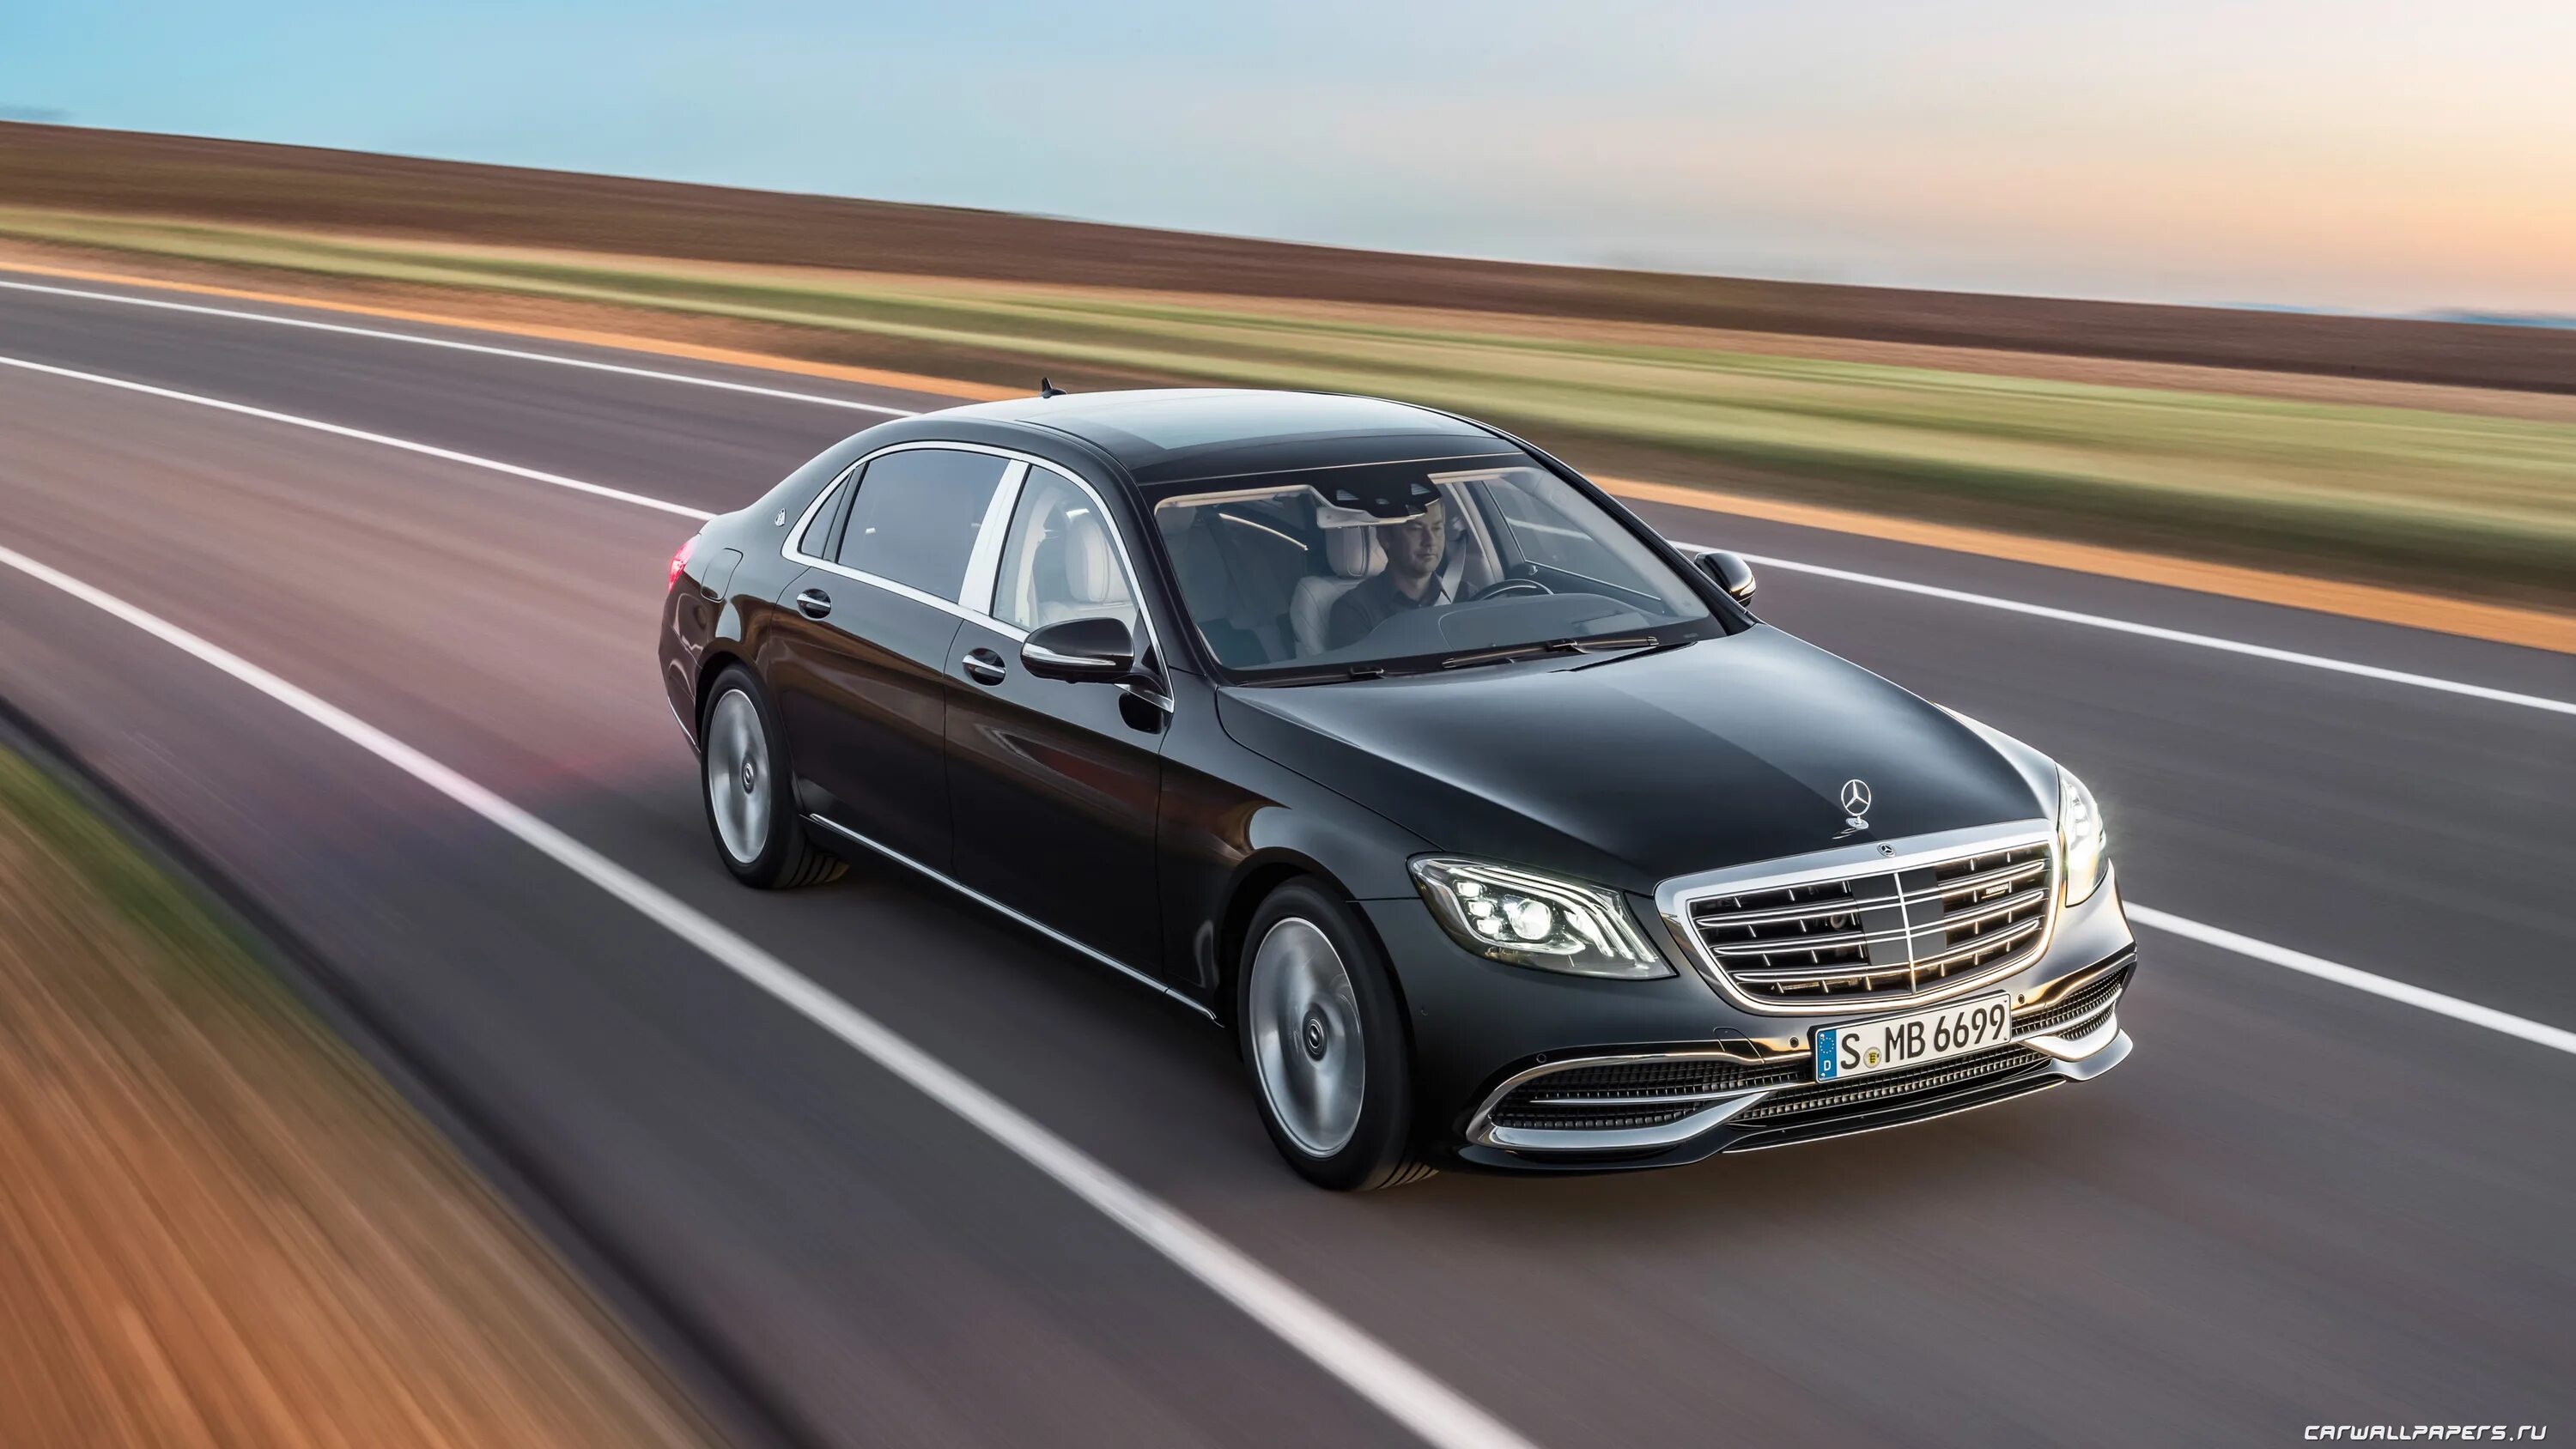 Mercedes Maybach s650. Мерседес Майбах 2018. Mercedes Benz s650 Maybach 2018. Майбах s 650 2018. Mercedes майбах